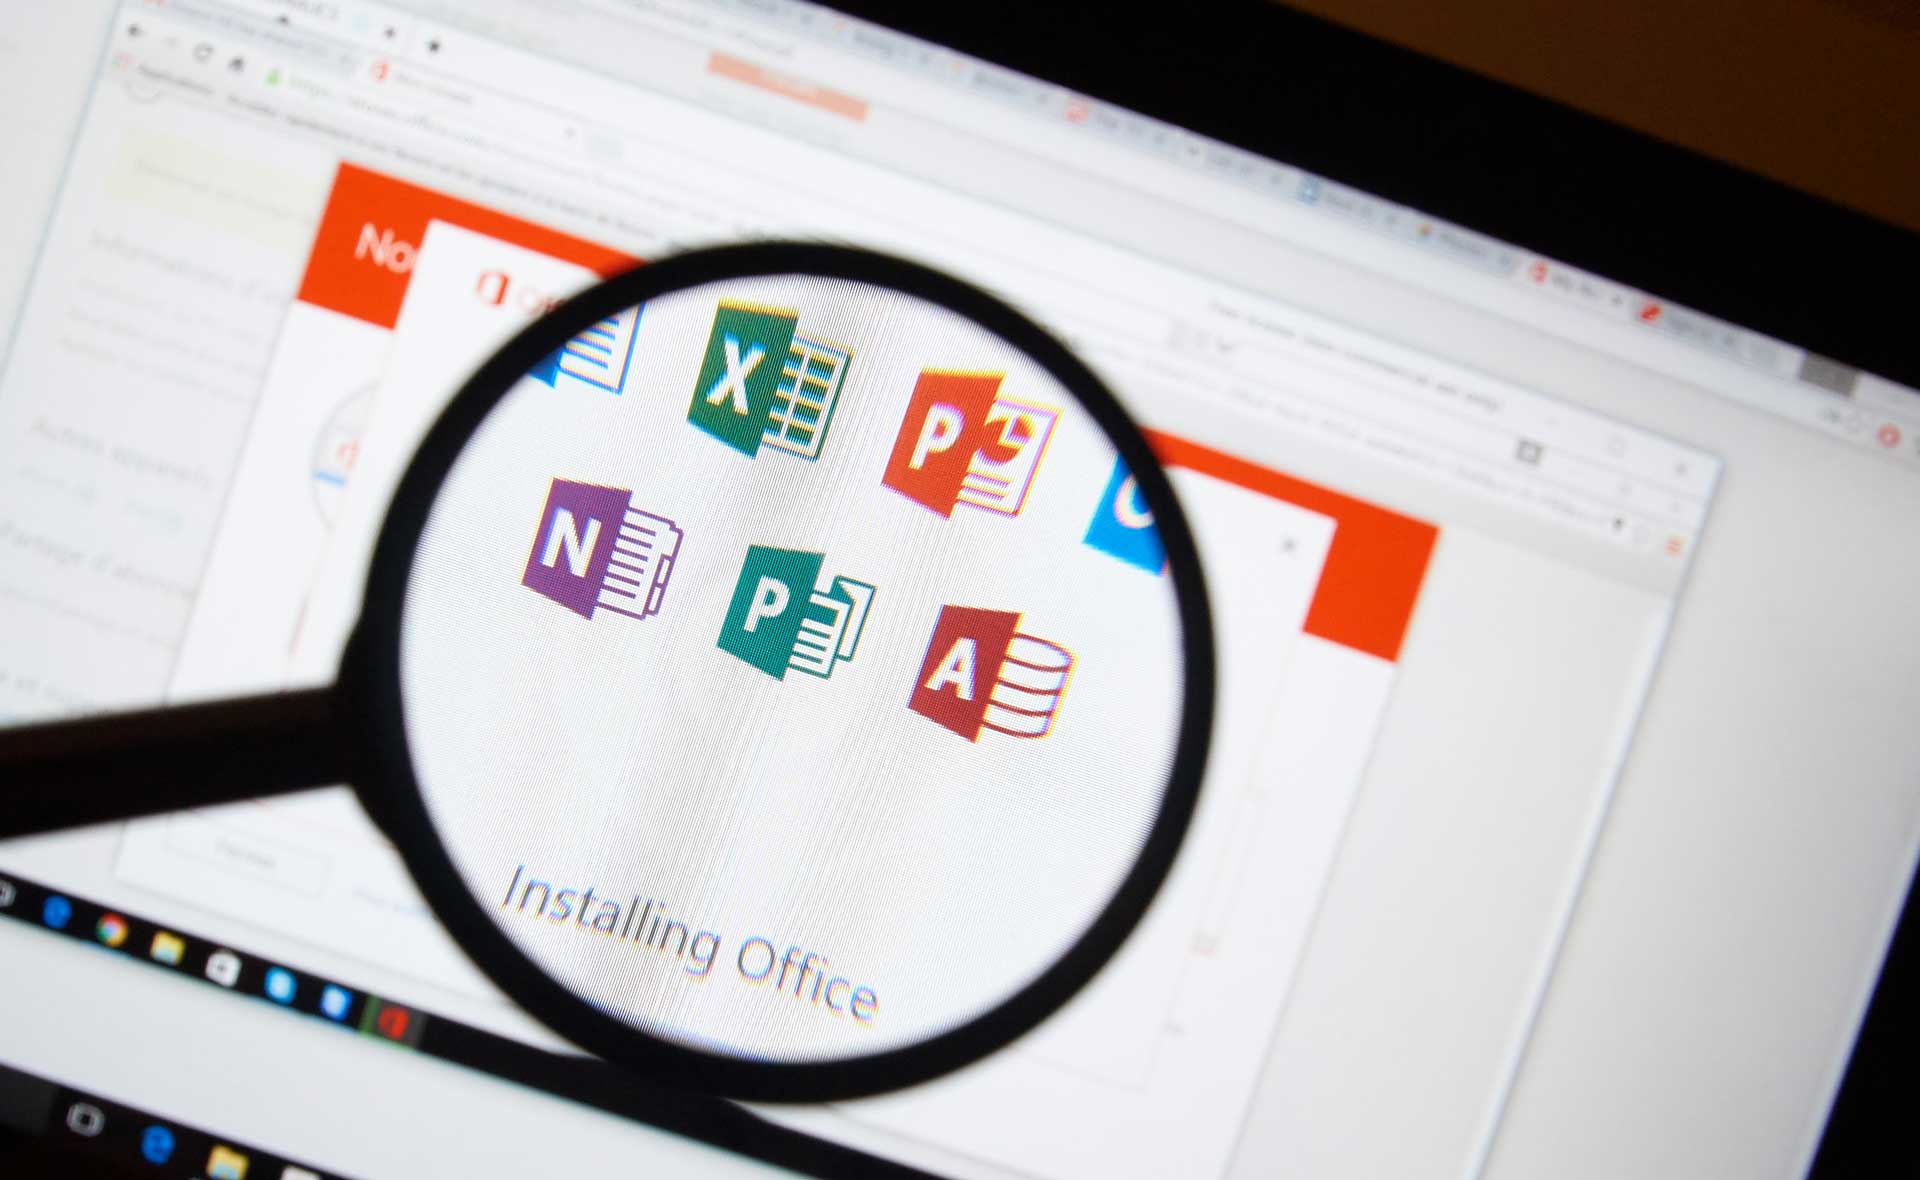 Microsoft Office application icons